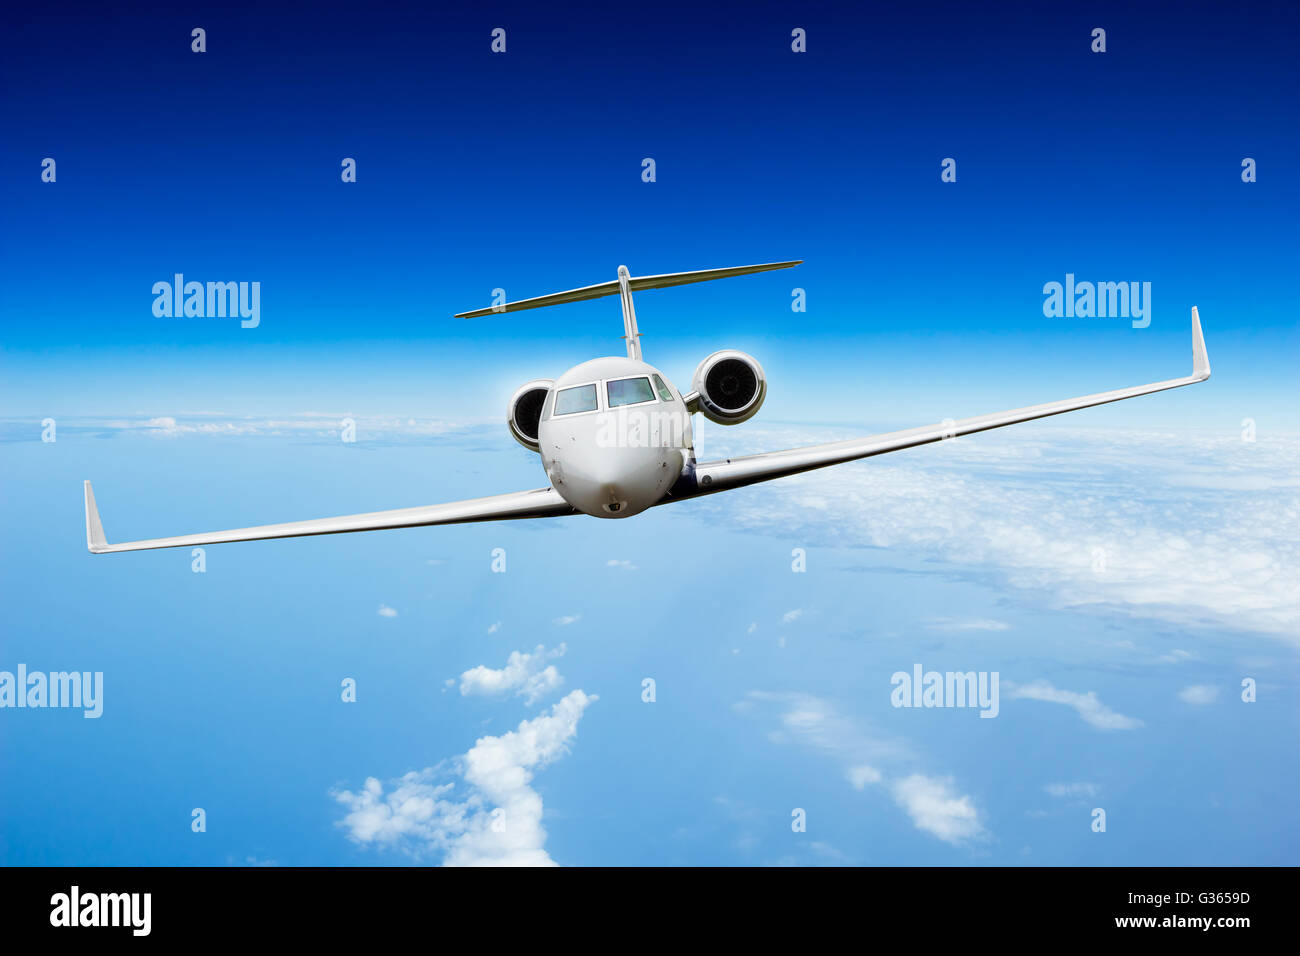 Private jet plane flying above clouds, shot from front view Stock Photo